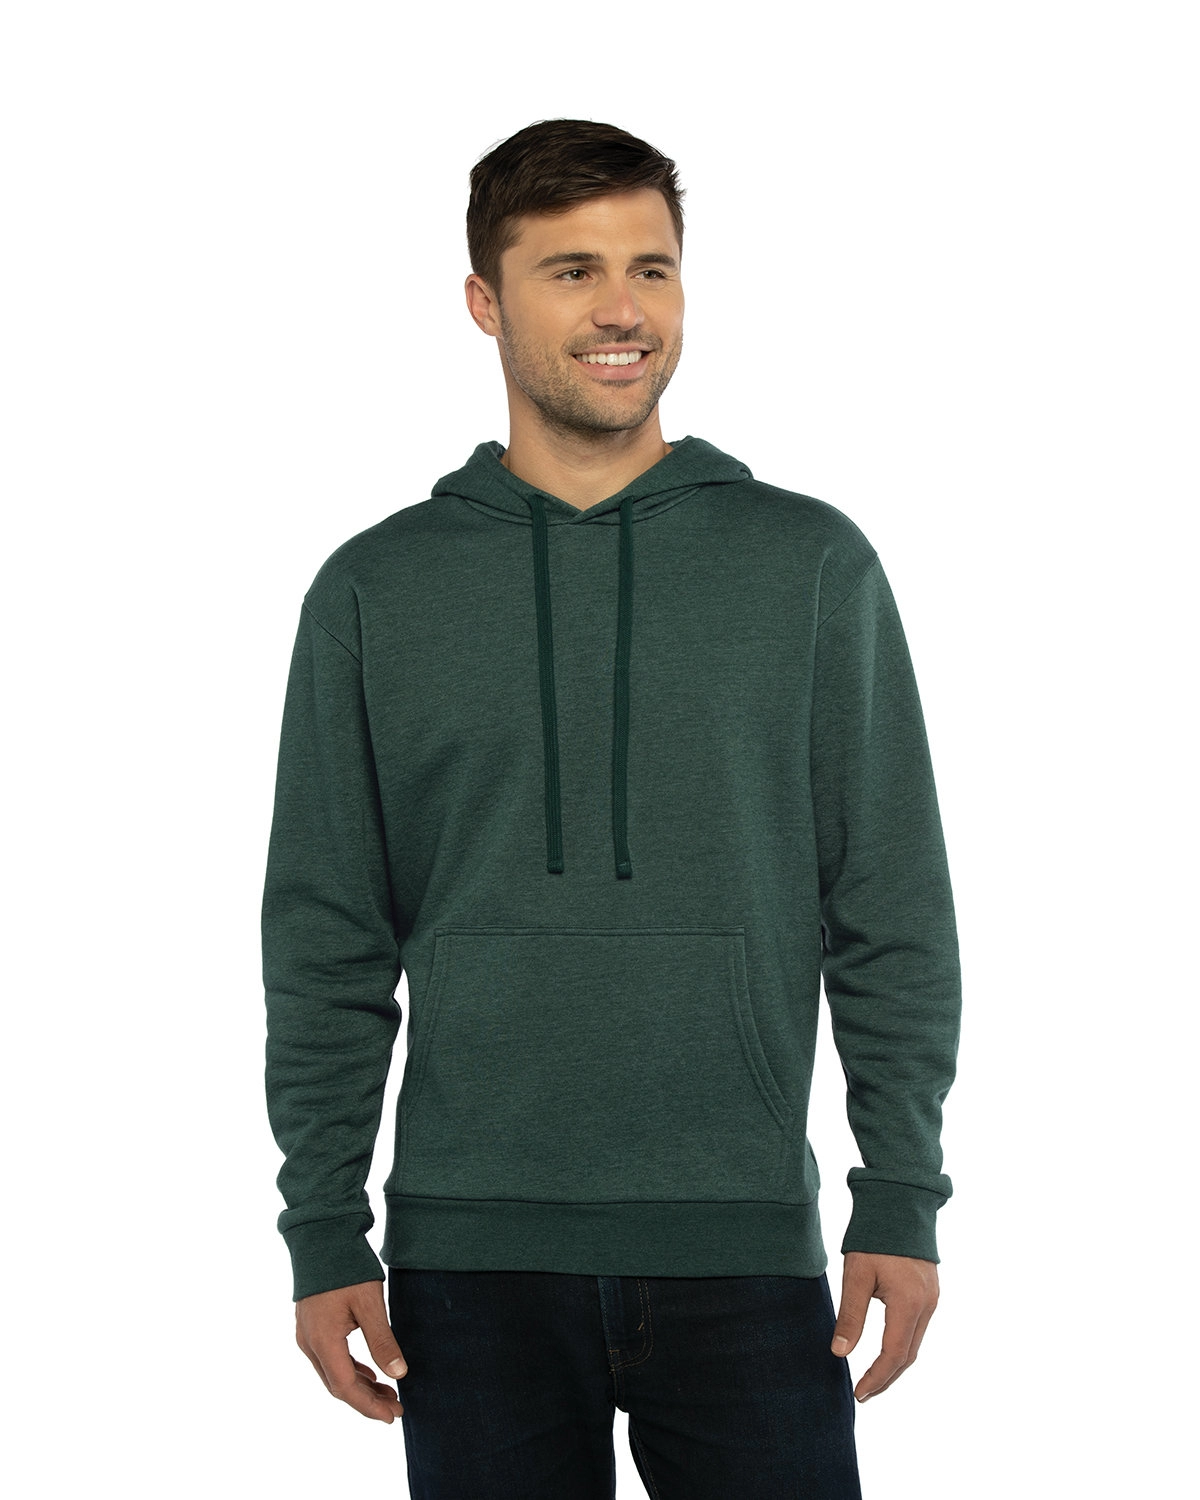 Next Level Apparel 9302 Unisex Classic PCH Pullover Hooded Sweatshirt ...